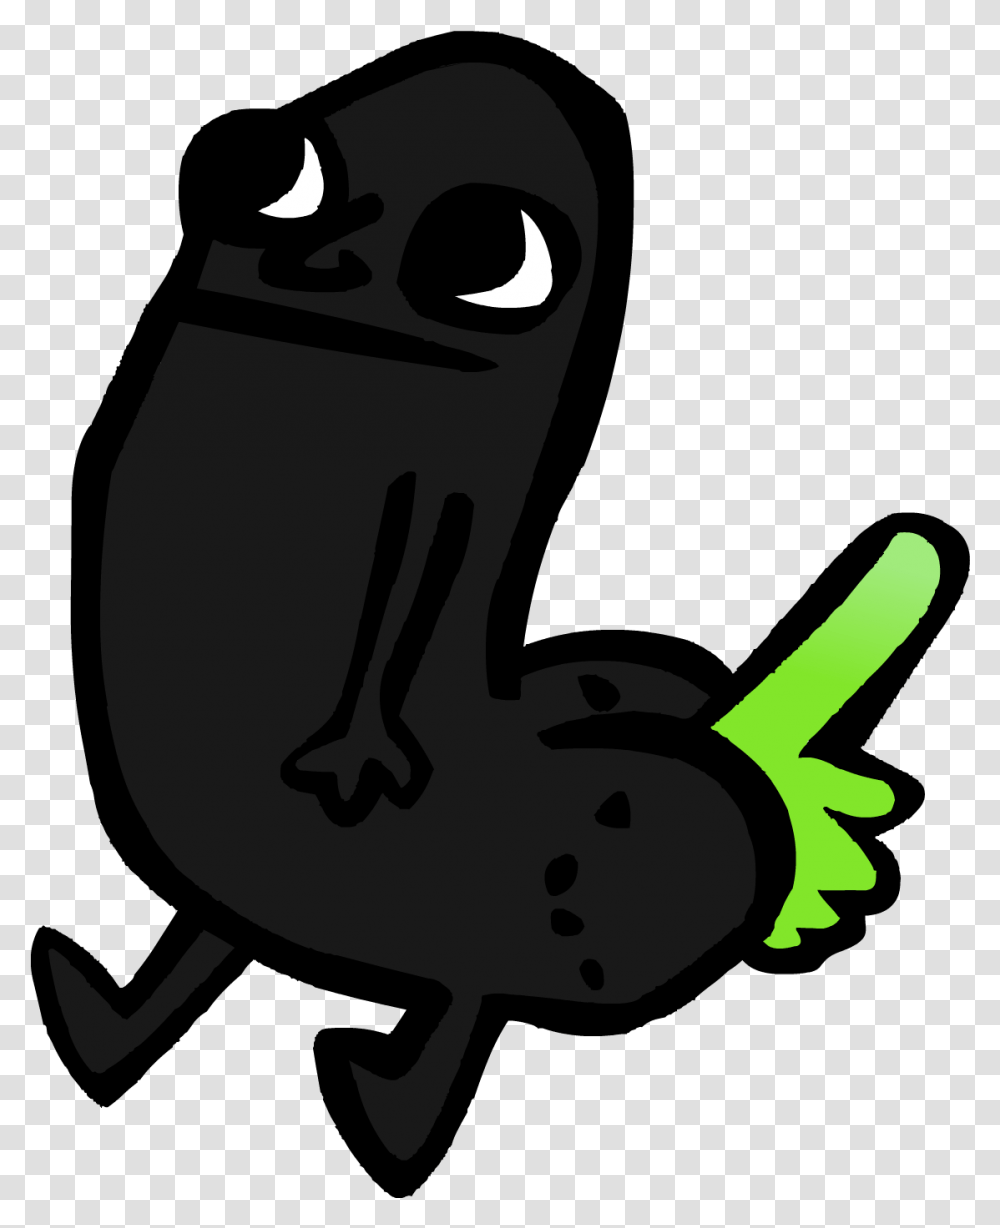 Dick Butt And His Clones Are Allowed Again Thanks Bro, Stencil, Ninja, Furniture Transparent Png